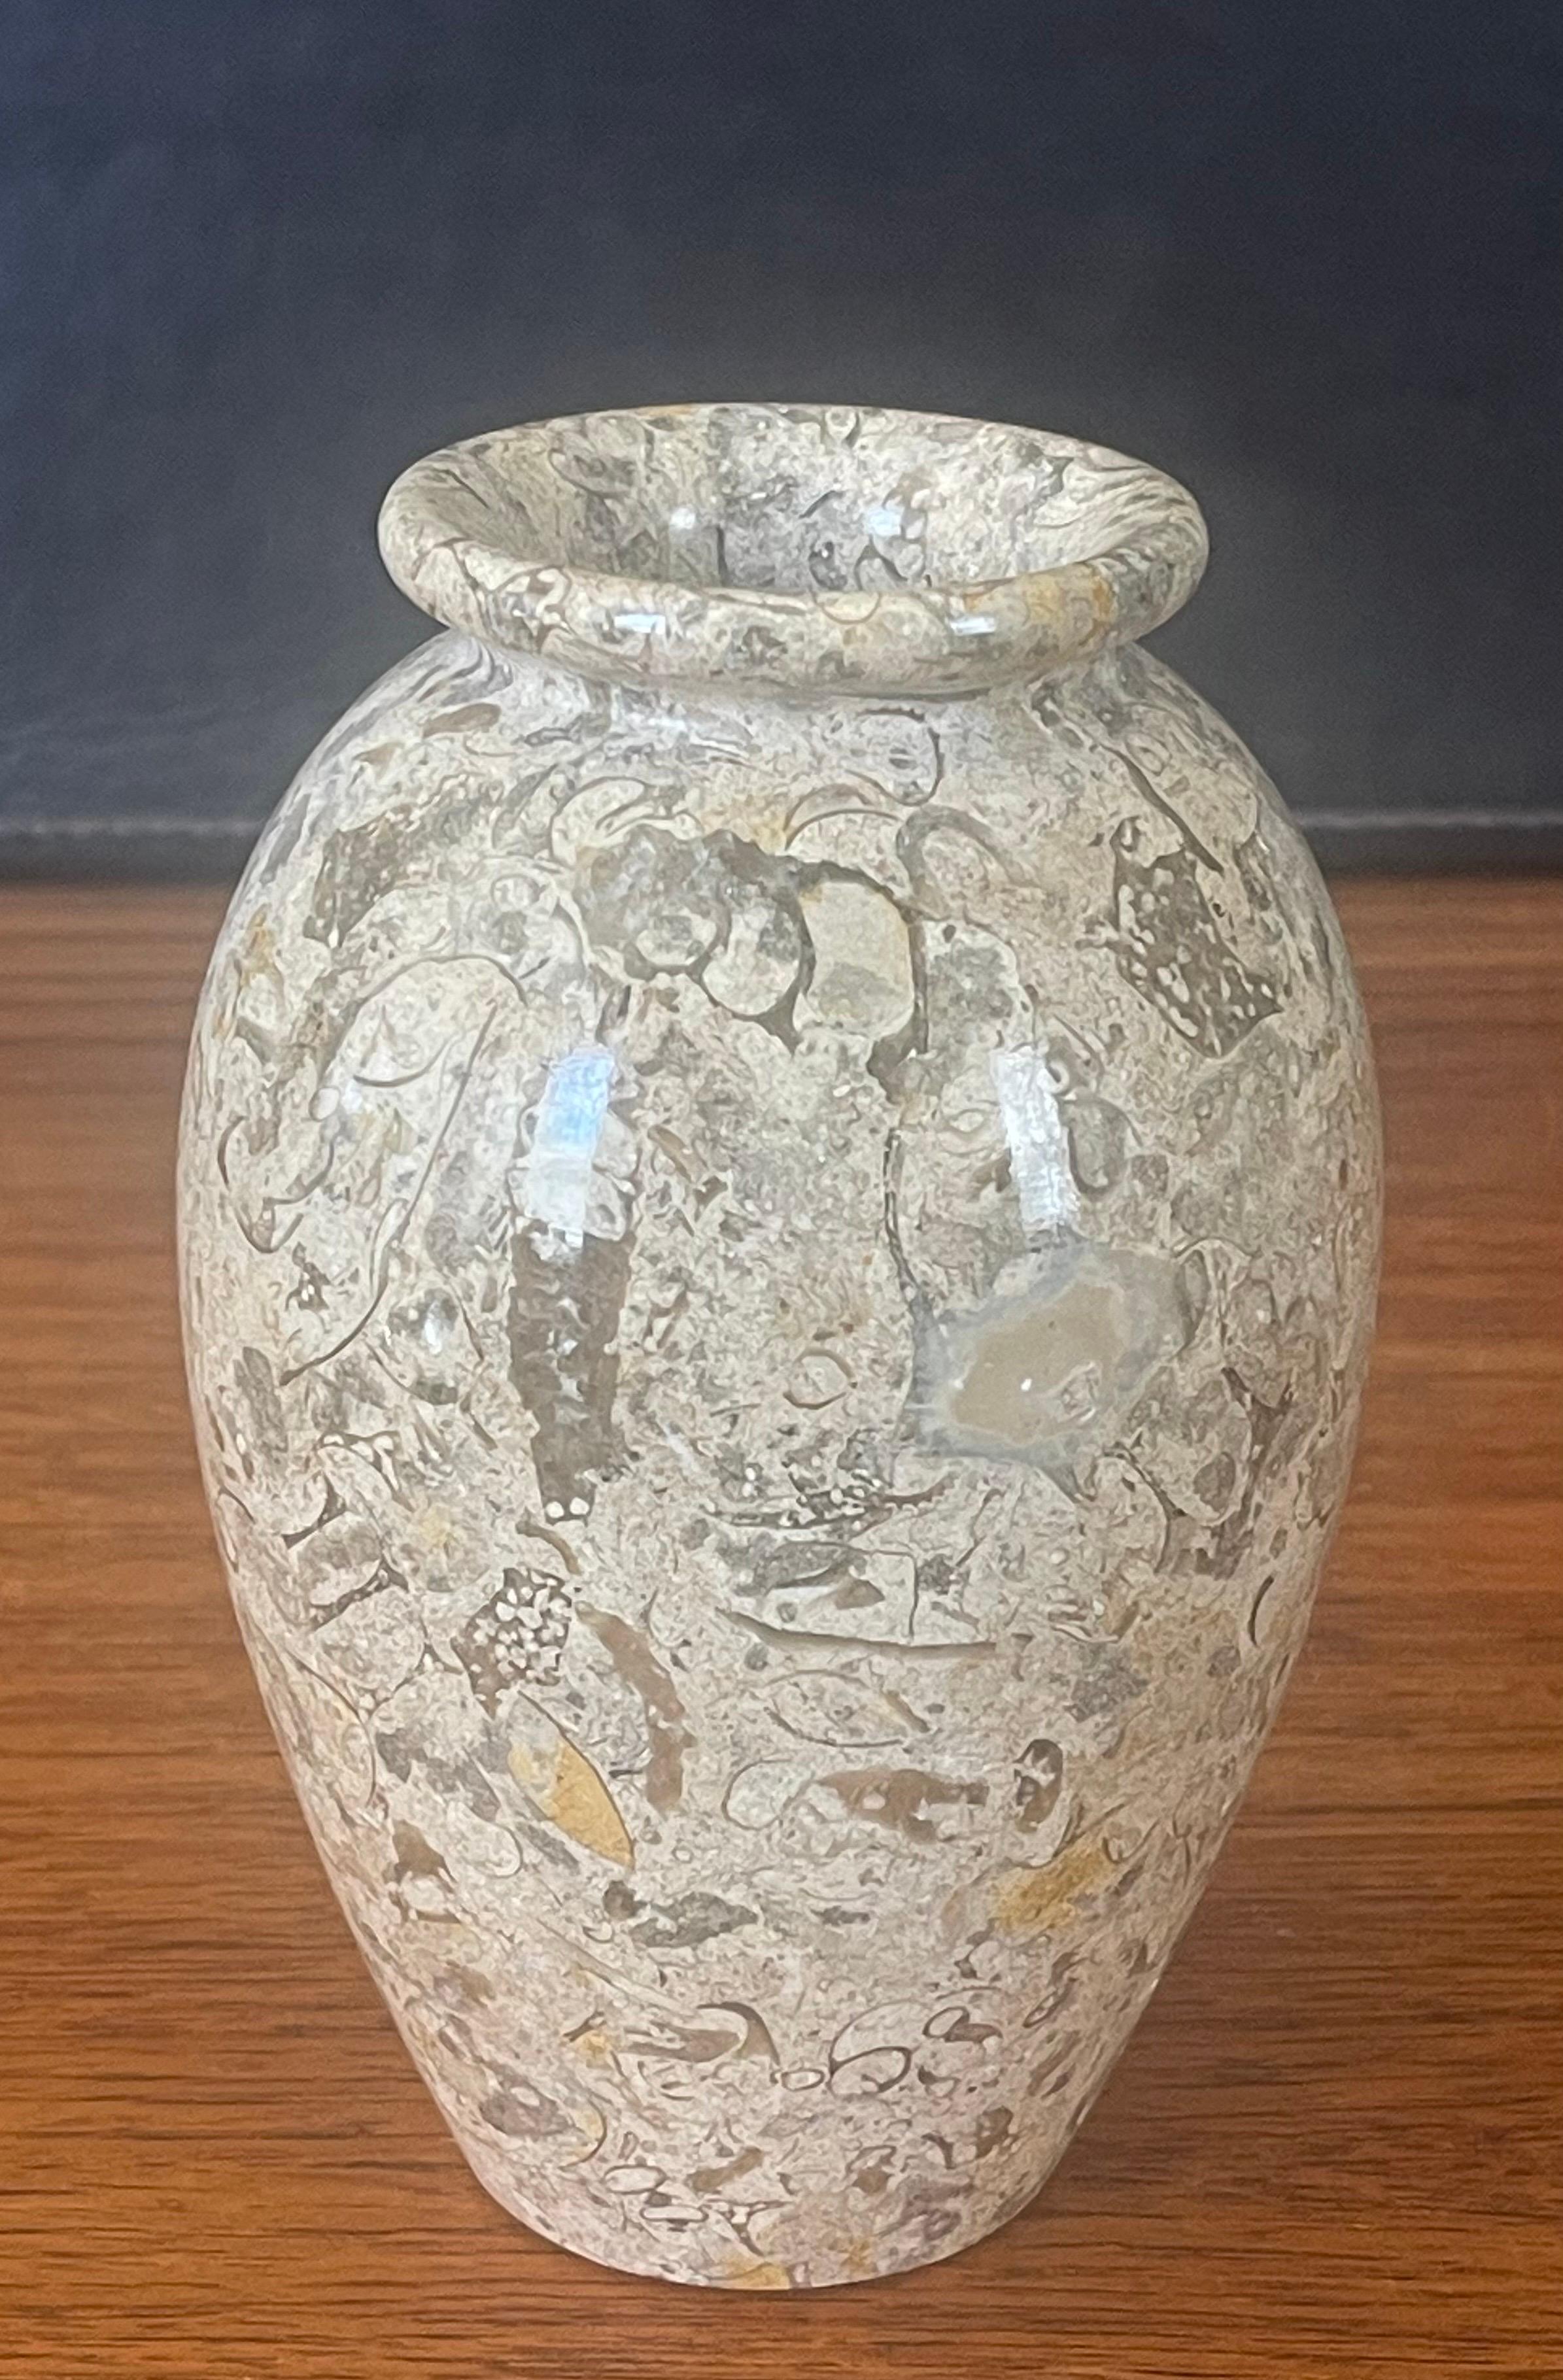 Small post-modern Italian marble vase, circa 1970s. The vase is primarily a dark tan in color, but has cream, black and grey veining throughout. The vase is in very good vintage condition with no chips or cracks and measures 5.5